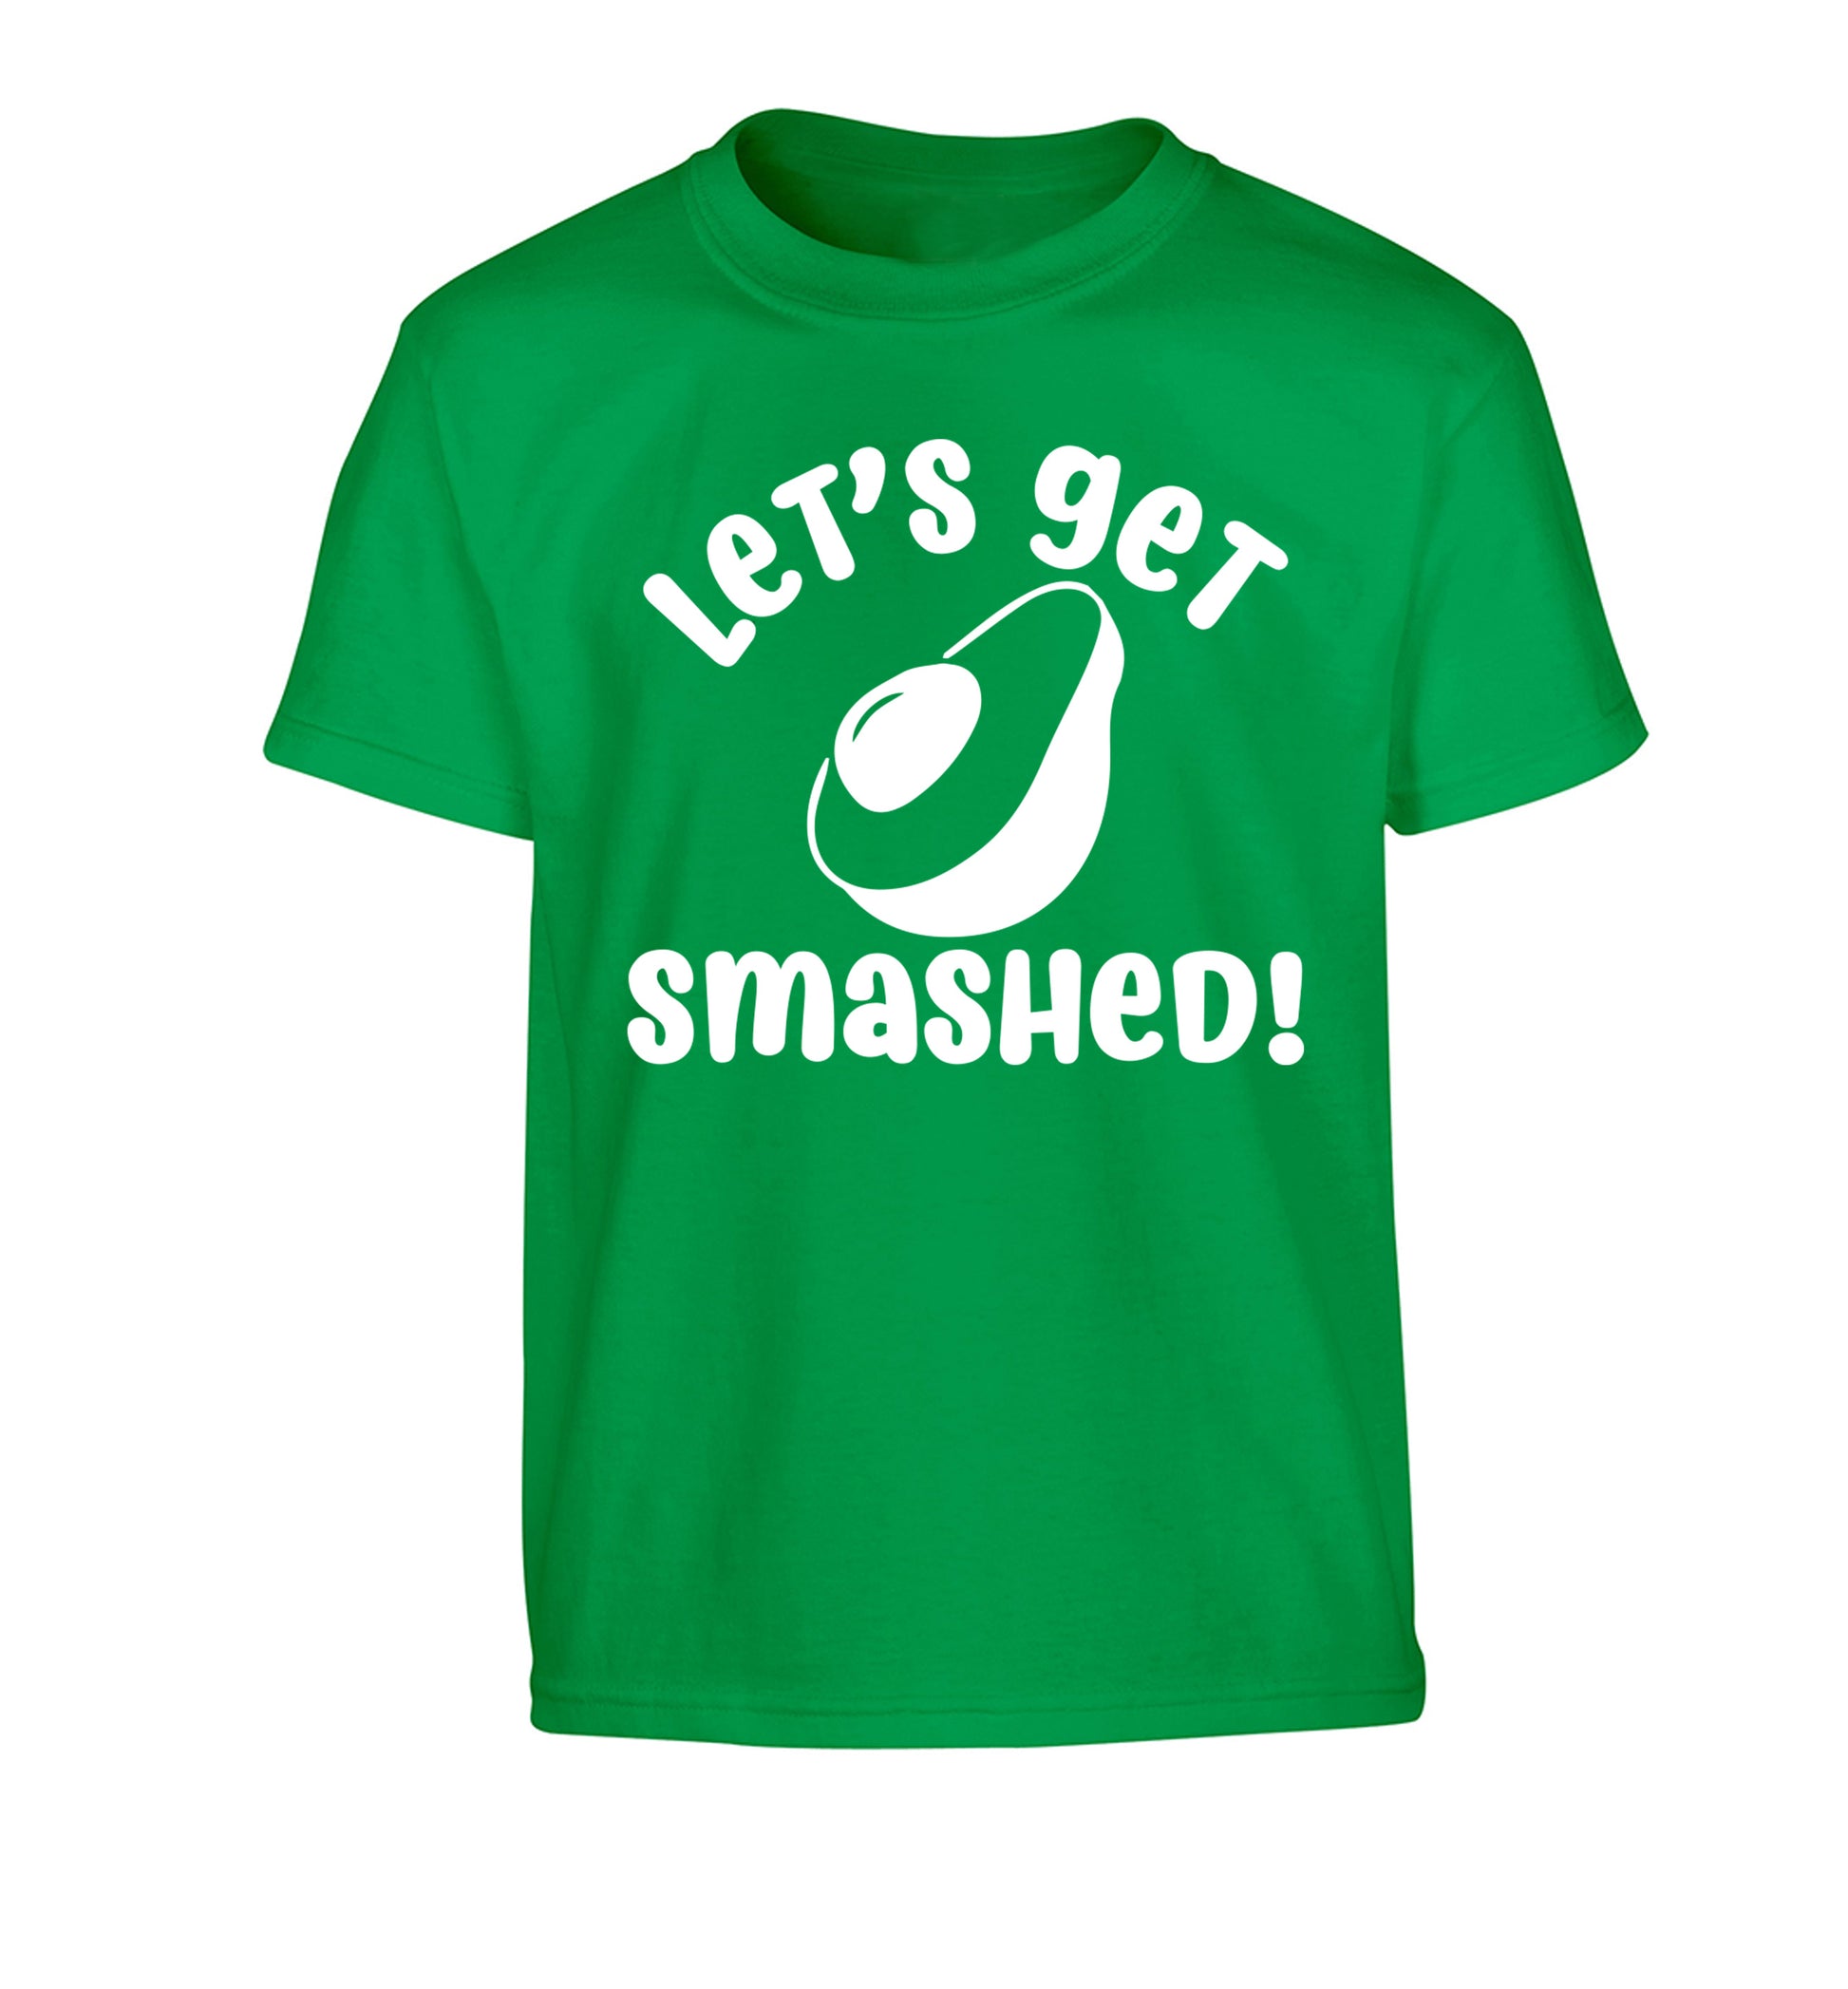 Let's get smashed Children's green Tshirt 12-14 Years